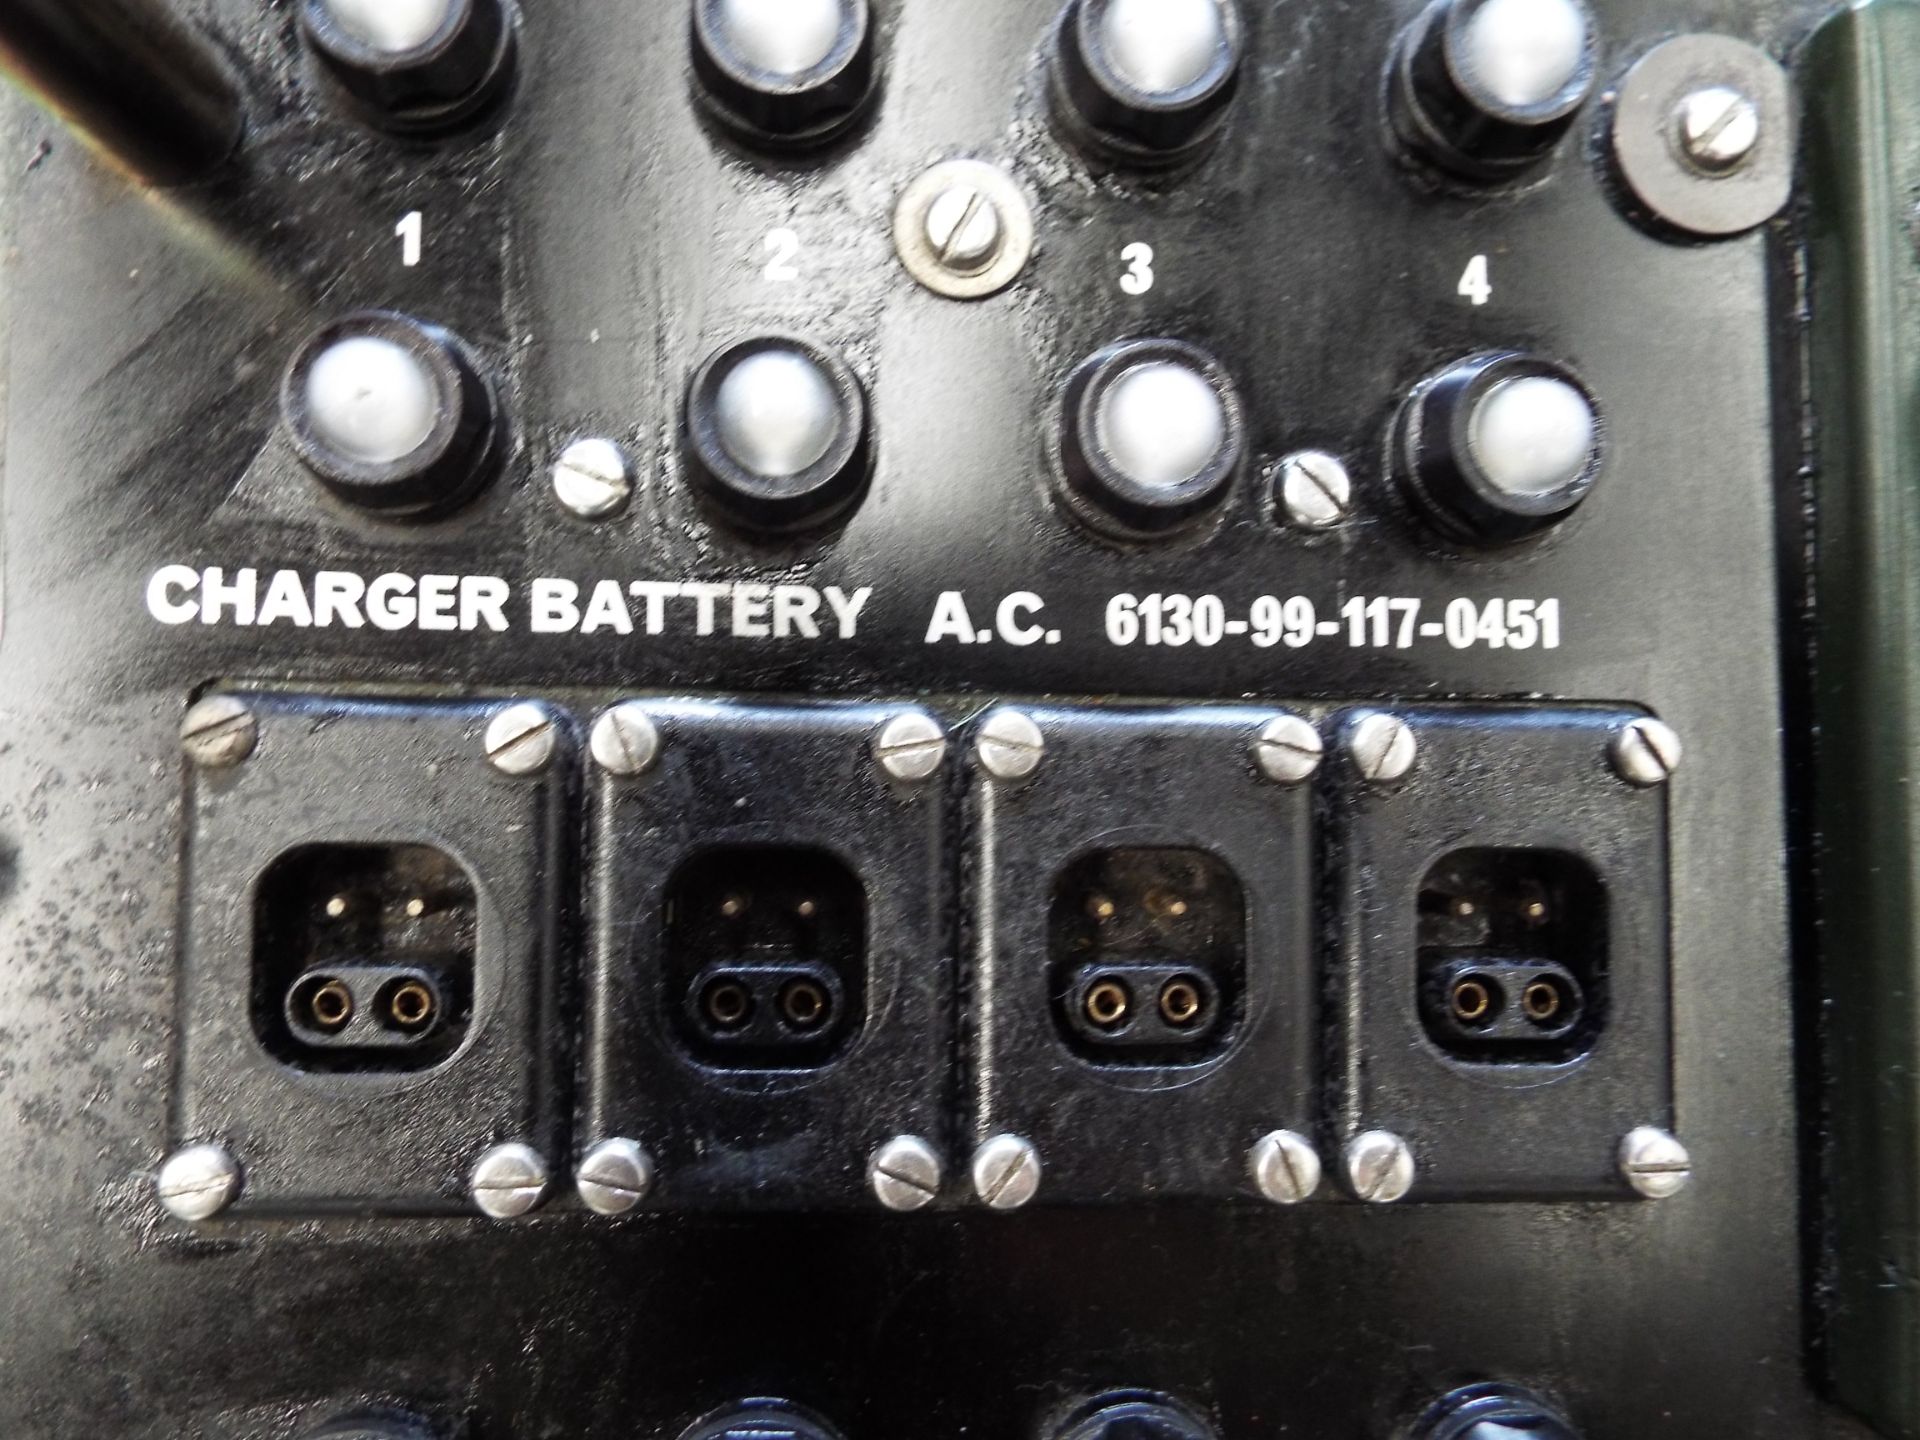 Clansman A.C. Battery Charger - Image 3 of 6